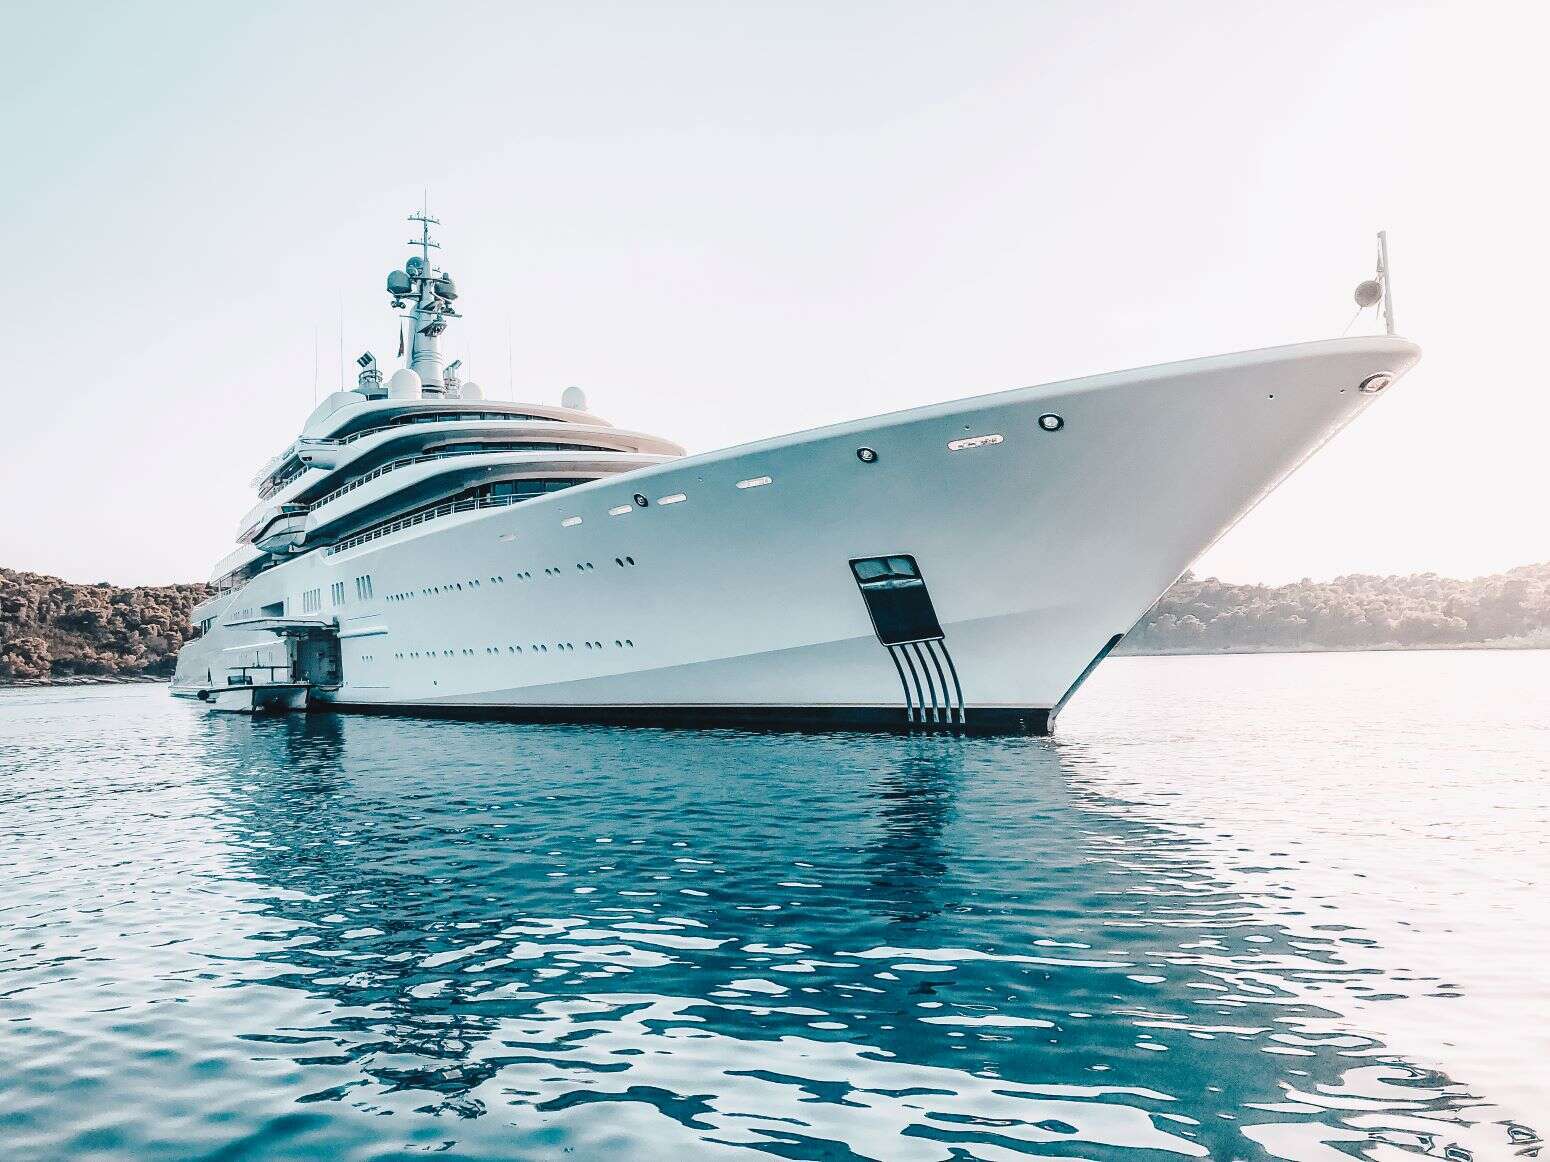 zebra heltinde Reorganisere These are the 10 Biggest Superyachts in the World Today